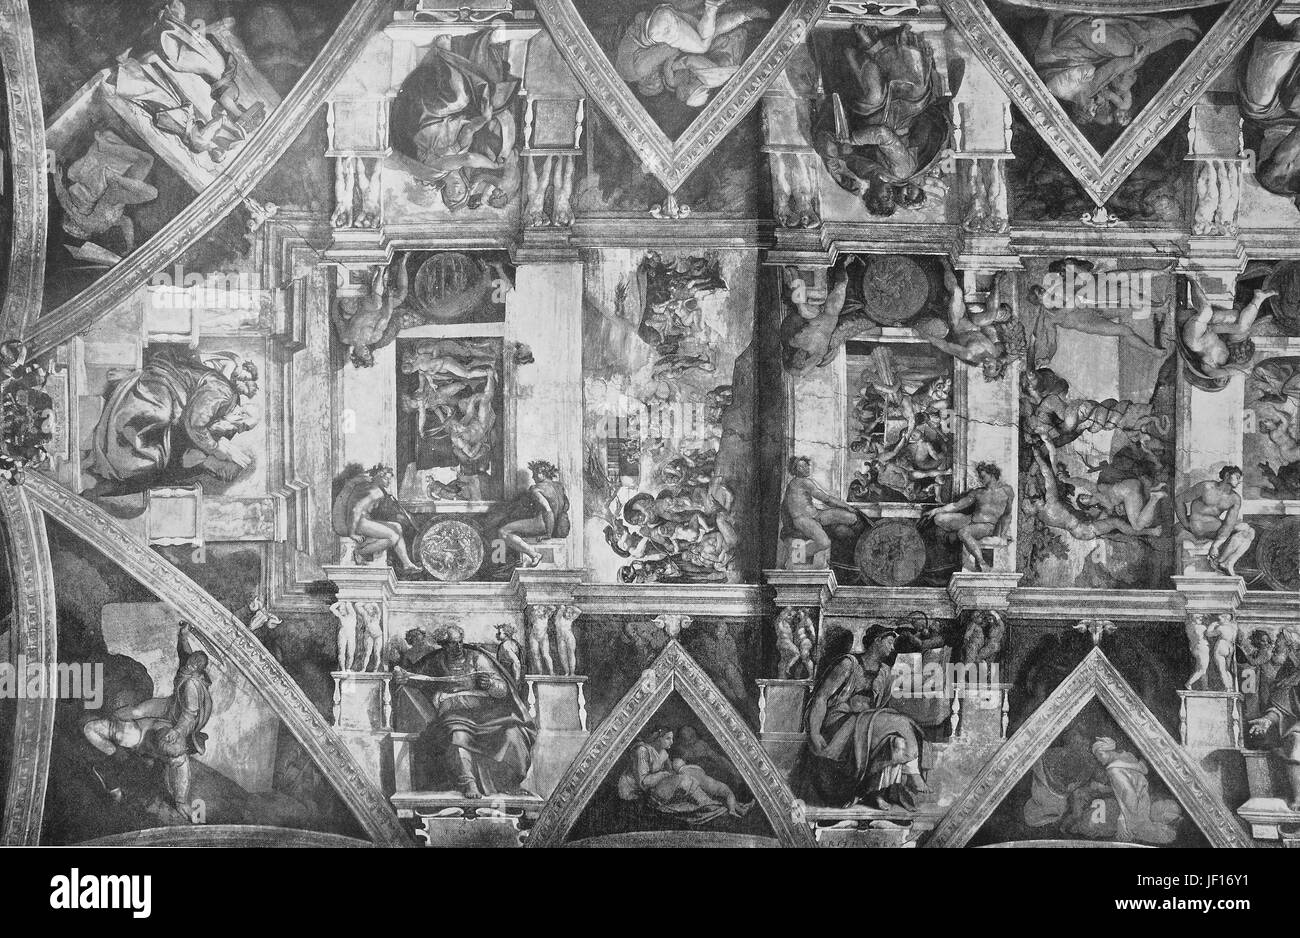 Historical Image Of A Section Of The Sistine Chapel Ceiling Stock